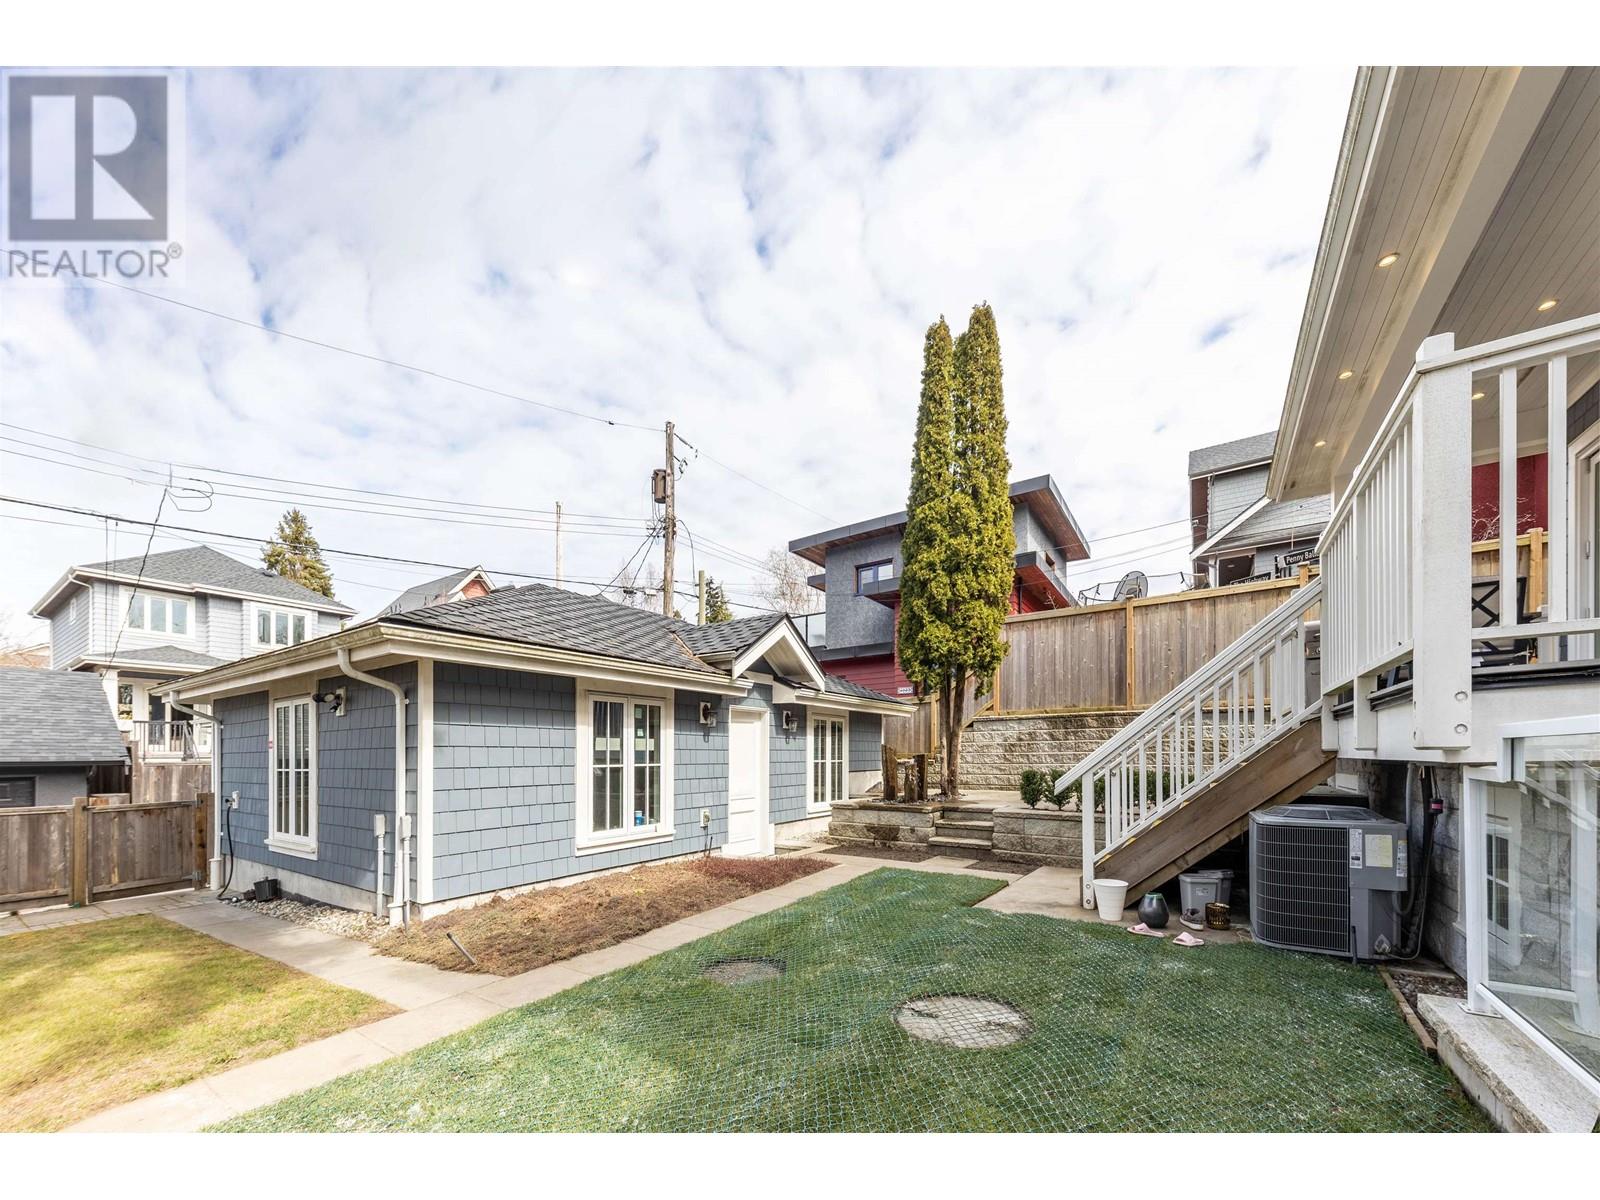 Listing Picture 19 of 39 : 4089 W 19TH AVENUE, Vancouver / 溫哥華 - 魯藝地產 Yvonne Lu Group - MLS Medallion Club Member